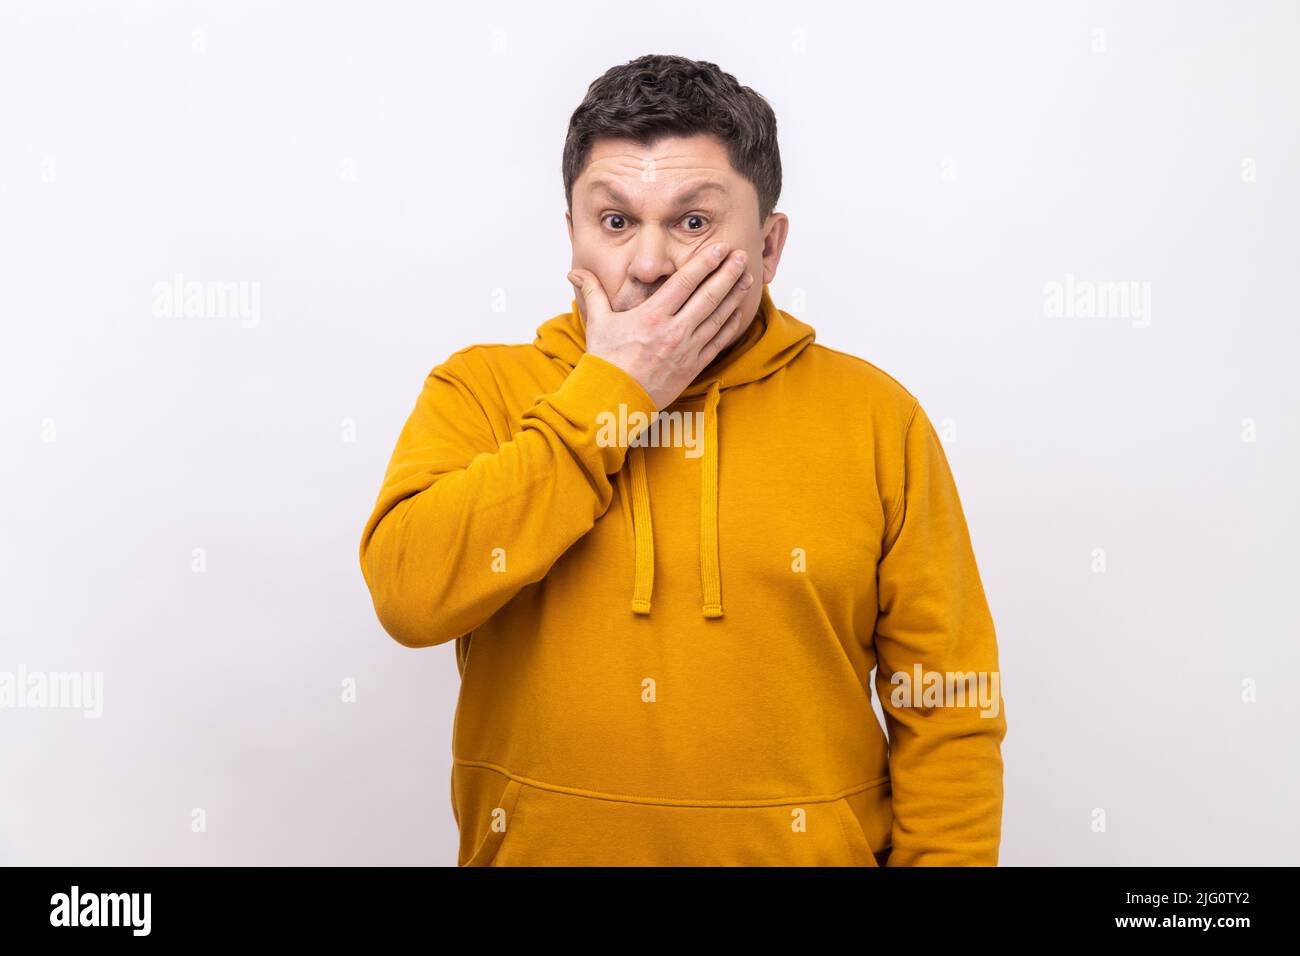 I won't say anyone. Portrait of confused man covering mouth with hand, keeping terrible secret truth, don't want to talk, wearing urban style hoodie. Indoor studio shot isolated on white background. Stock Photo